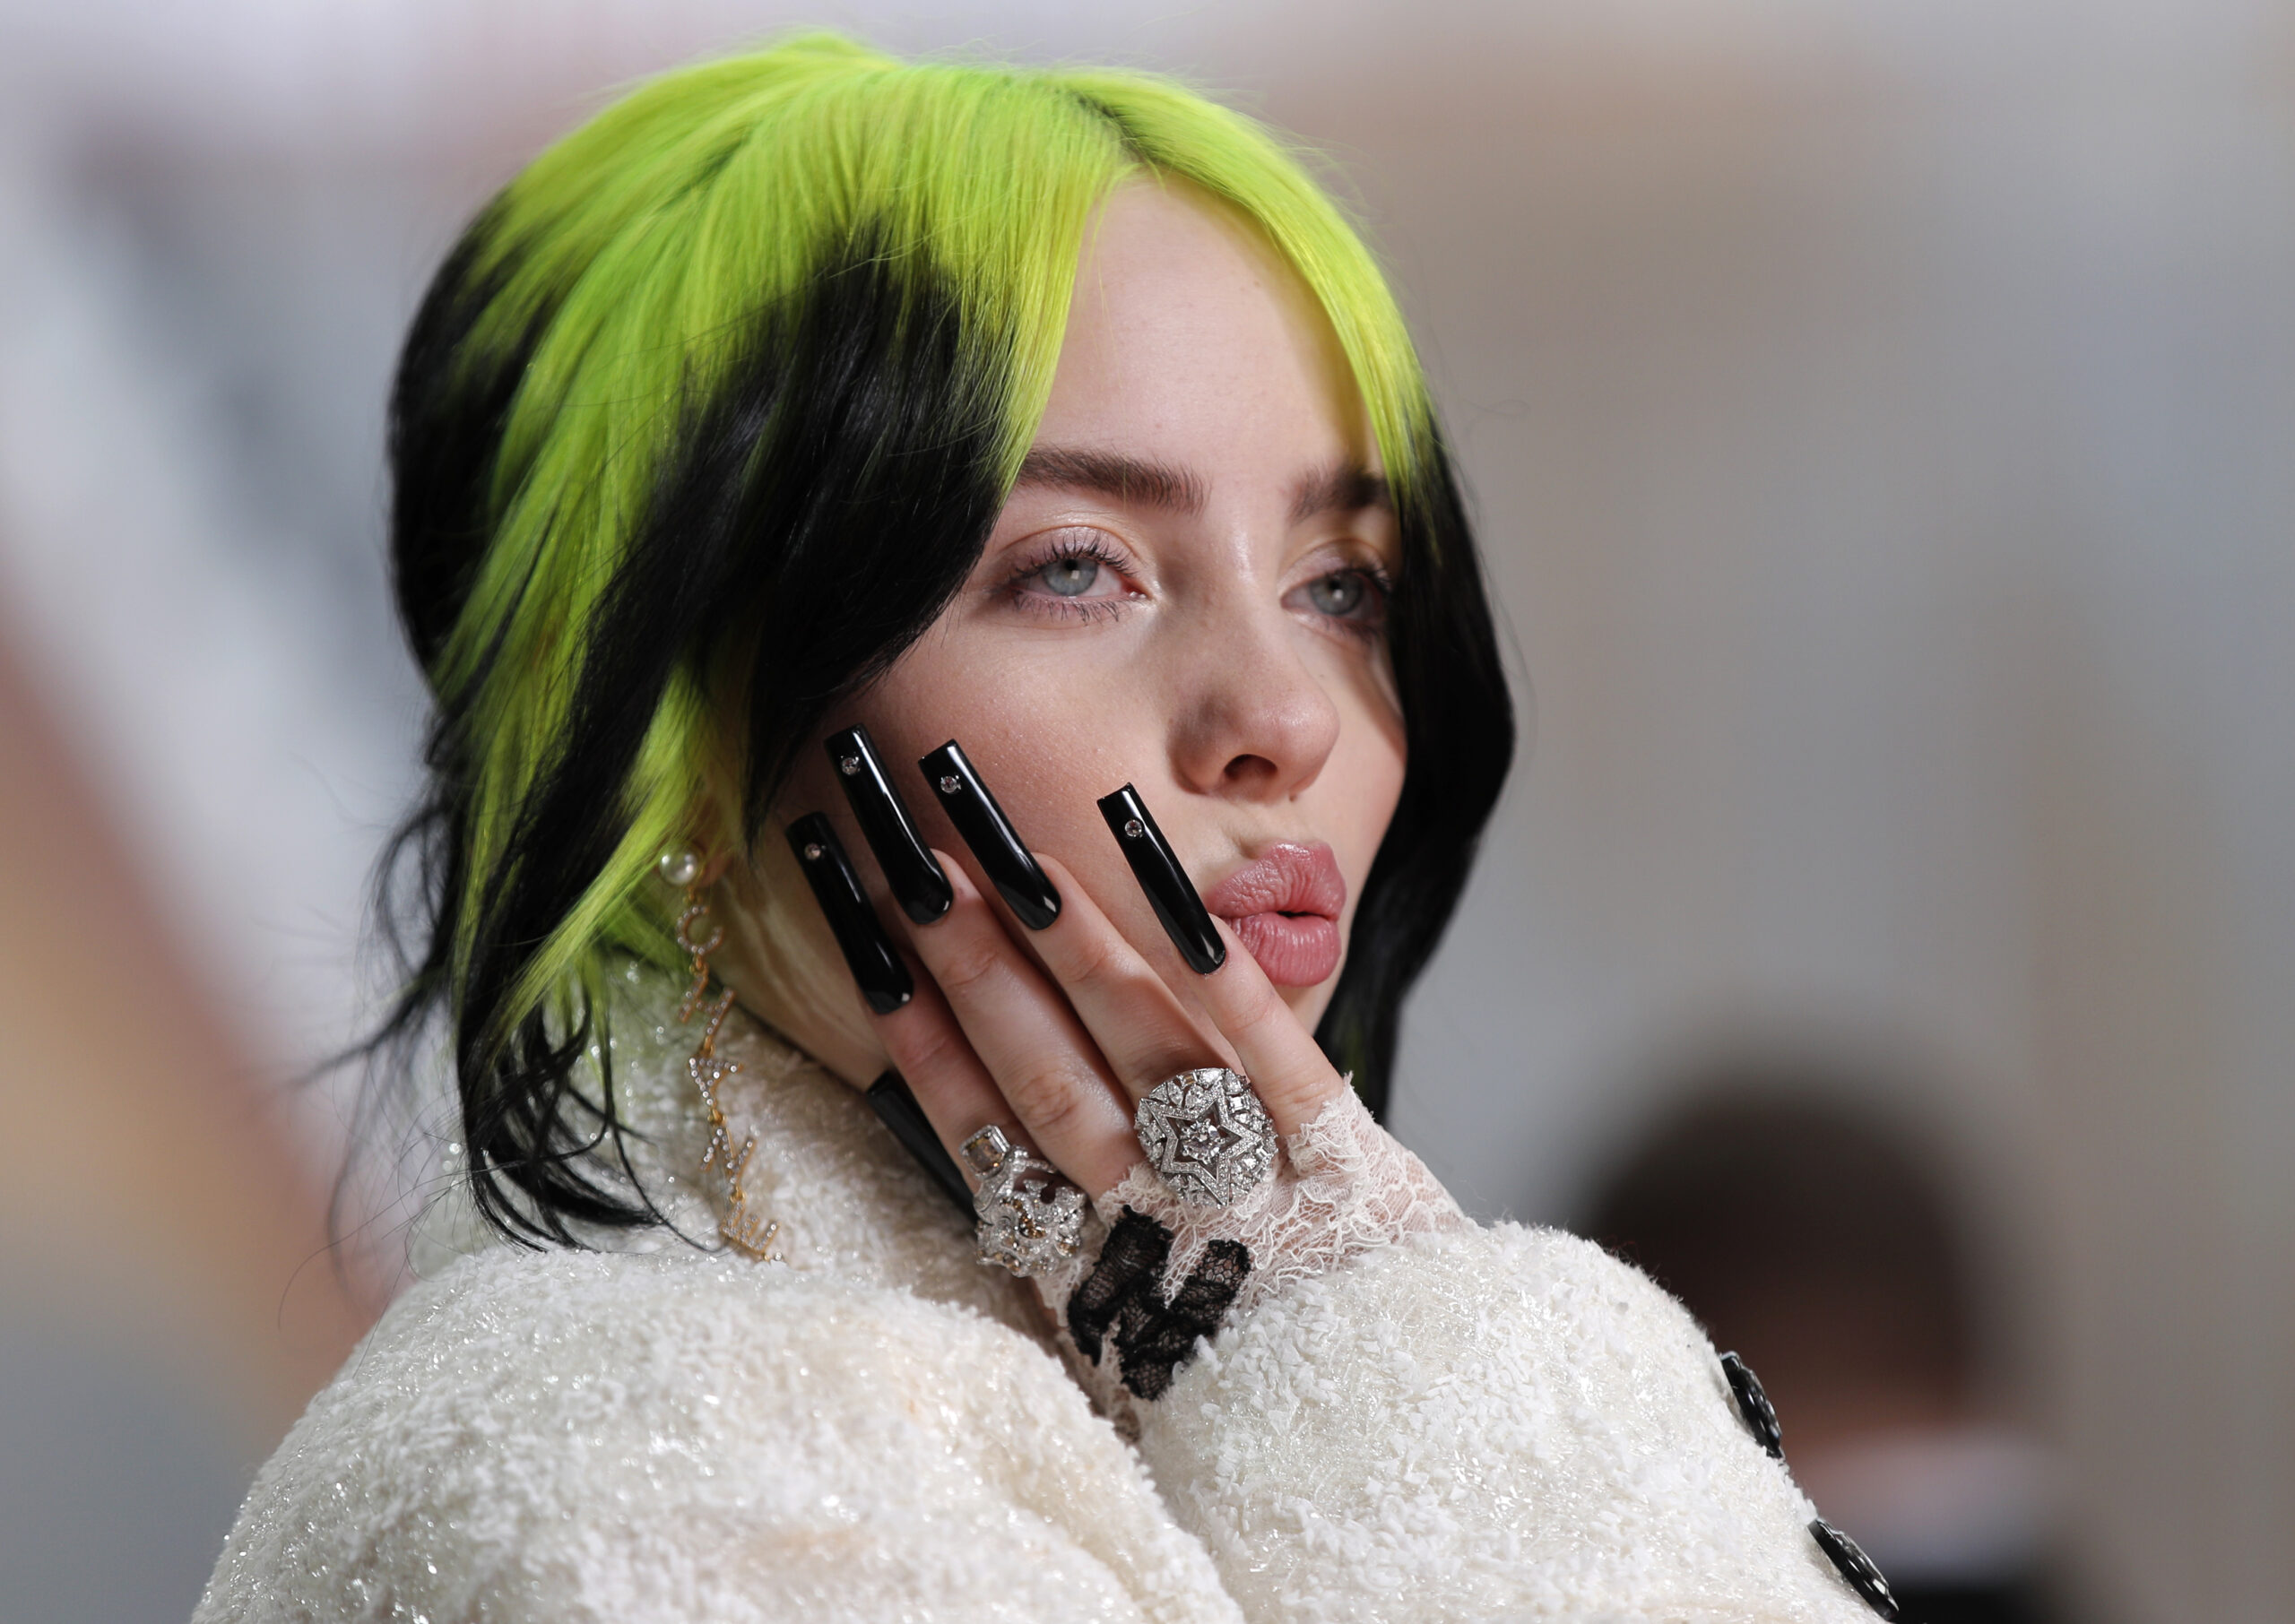 Suspect arrested in possible burglary of Billie Eilish’s family home ...